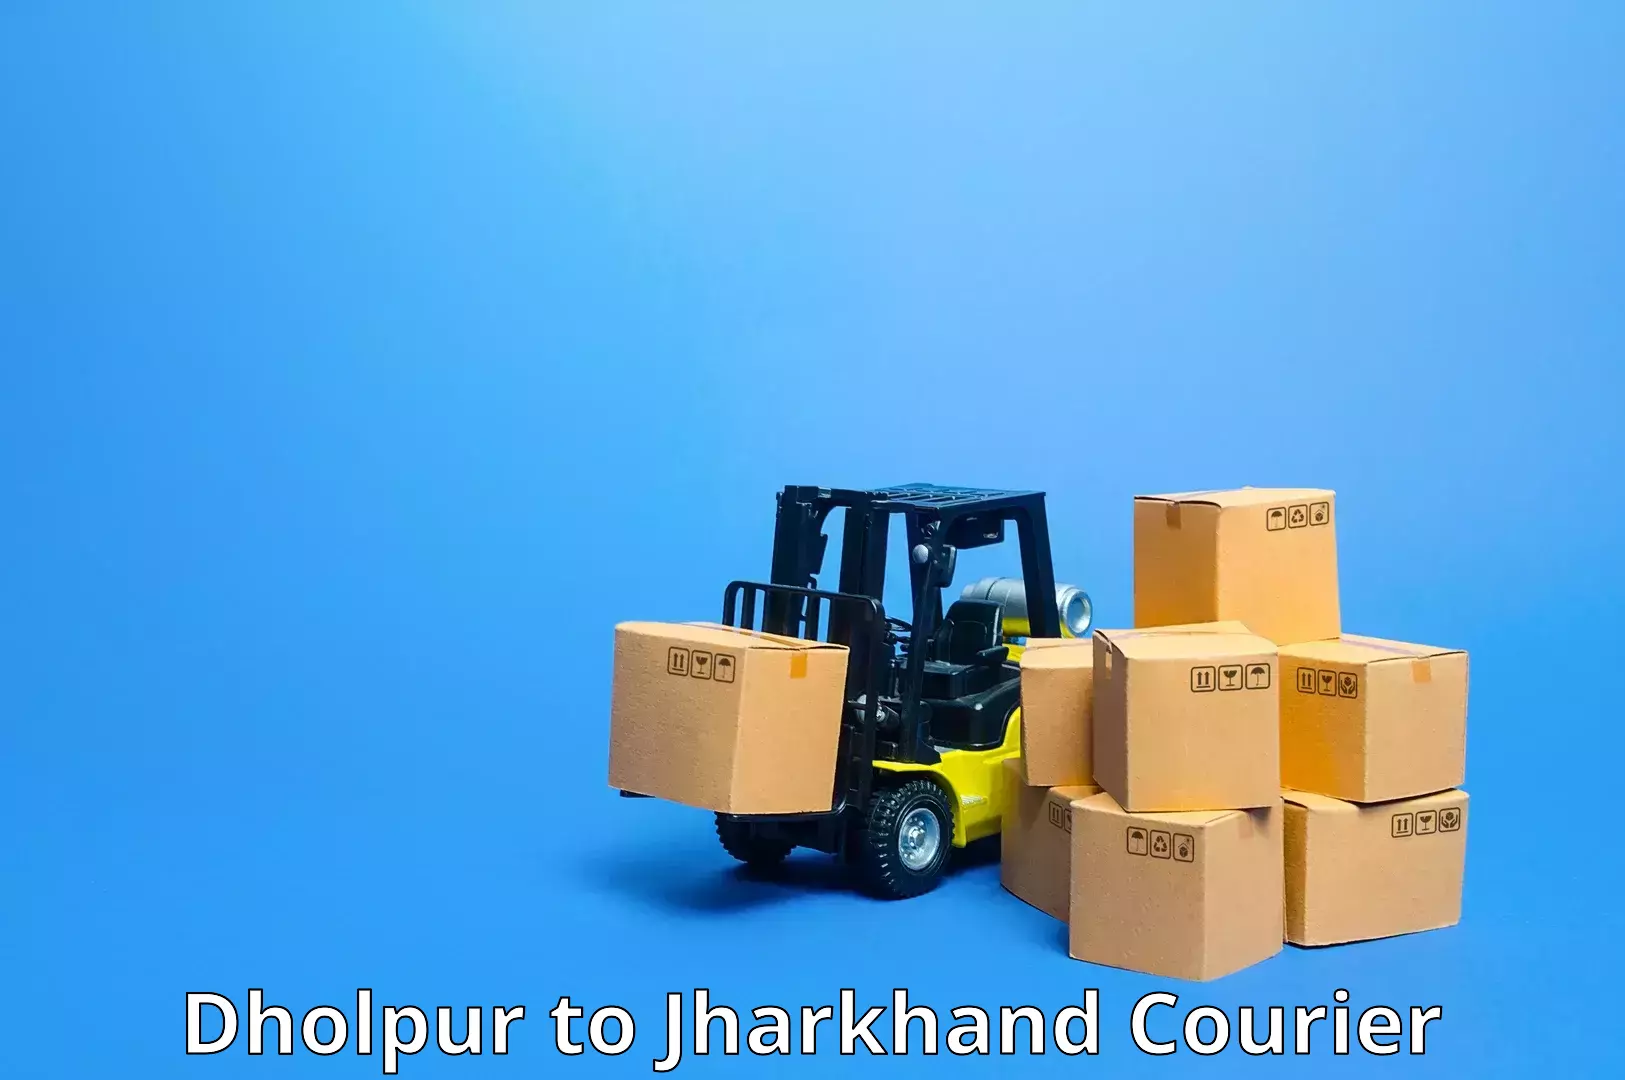 Flexible delivery scheduling Dholpur to Jharkhand